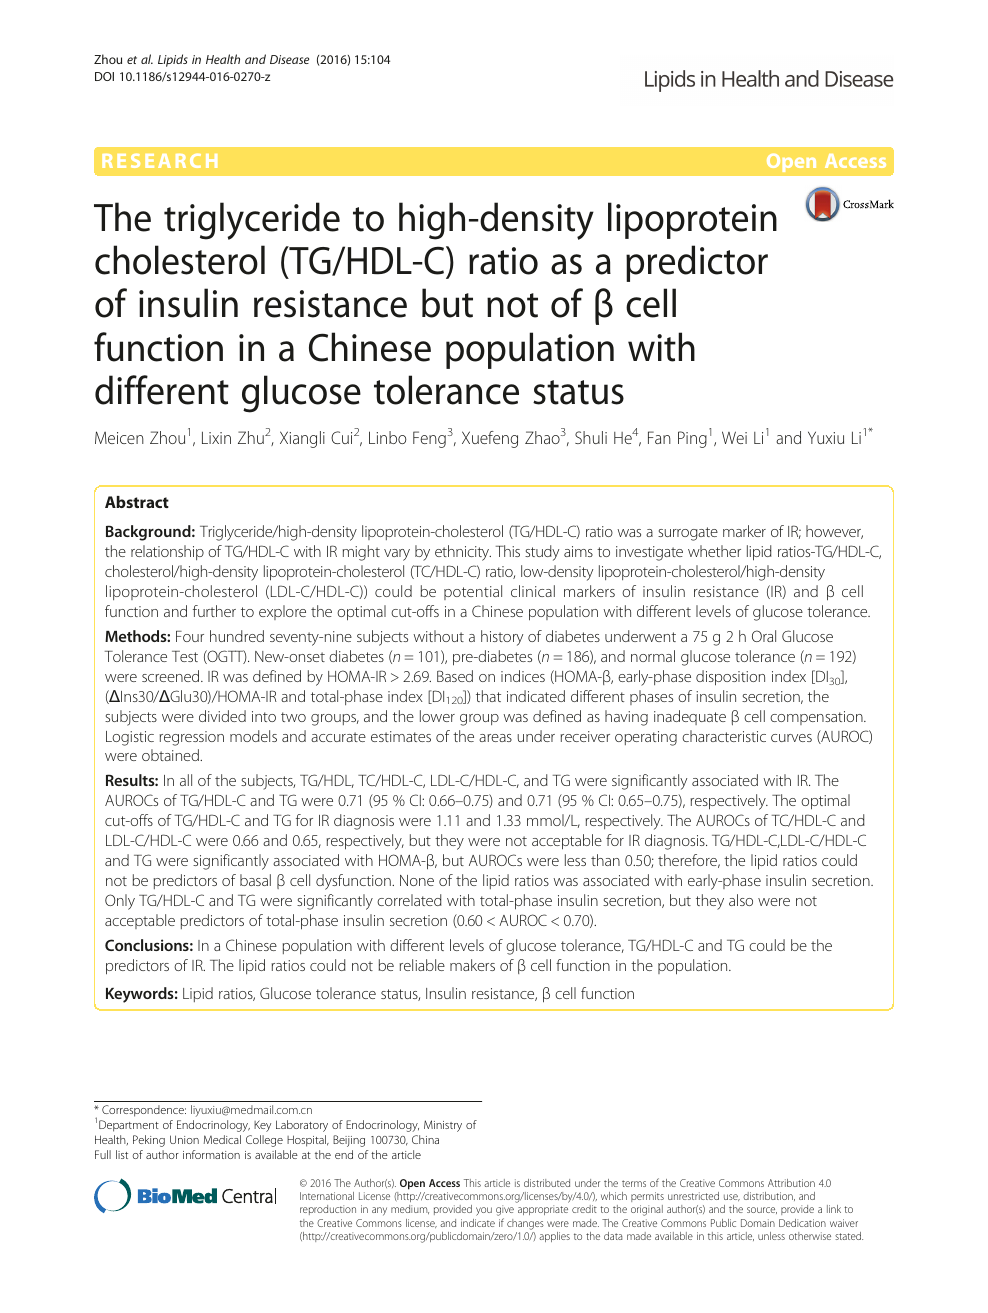 The Triglyceride To High Density Lipoprotein Cholesterol Tg Hdl C Ratio As A Predictor Of Insulin Resistance But Not Of B Cell Function In A Chinese Population With Different Glucose Tolerance Status Topic Of